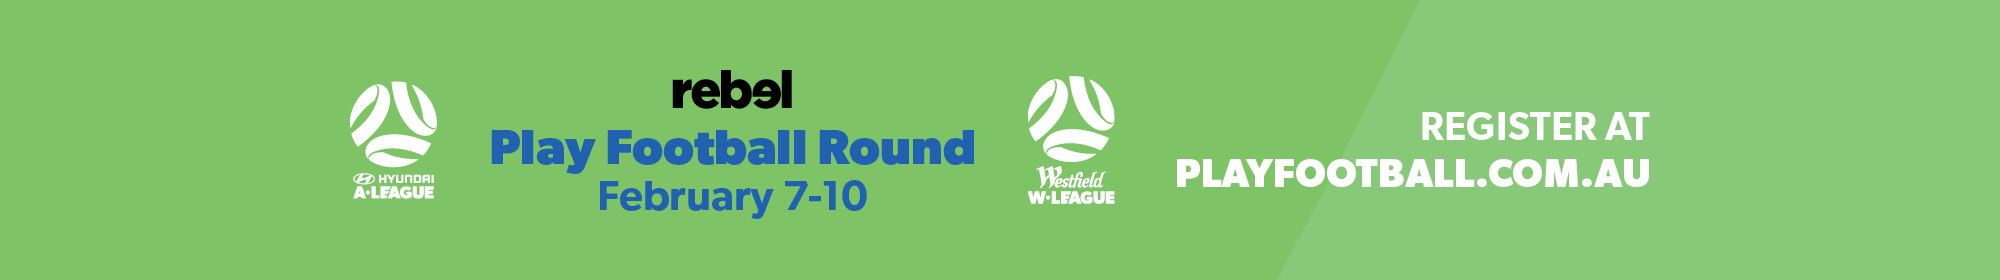 Play Football Round Banner